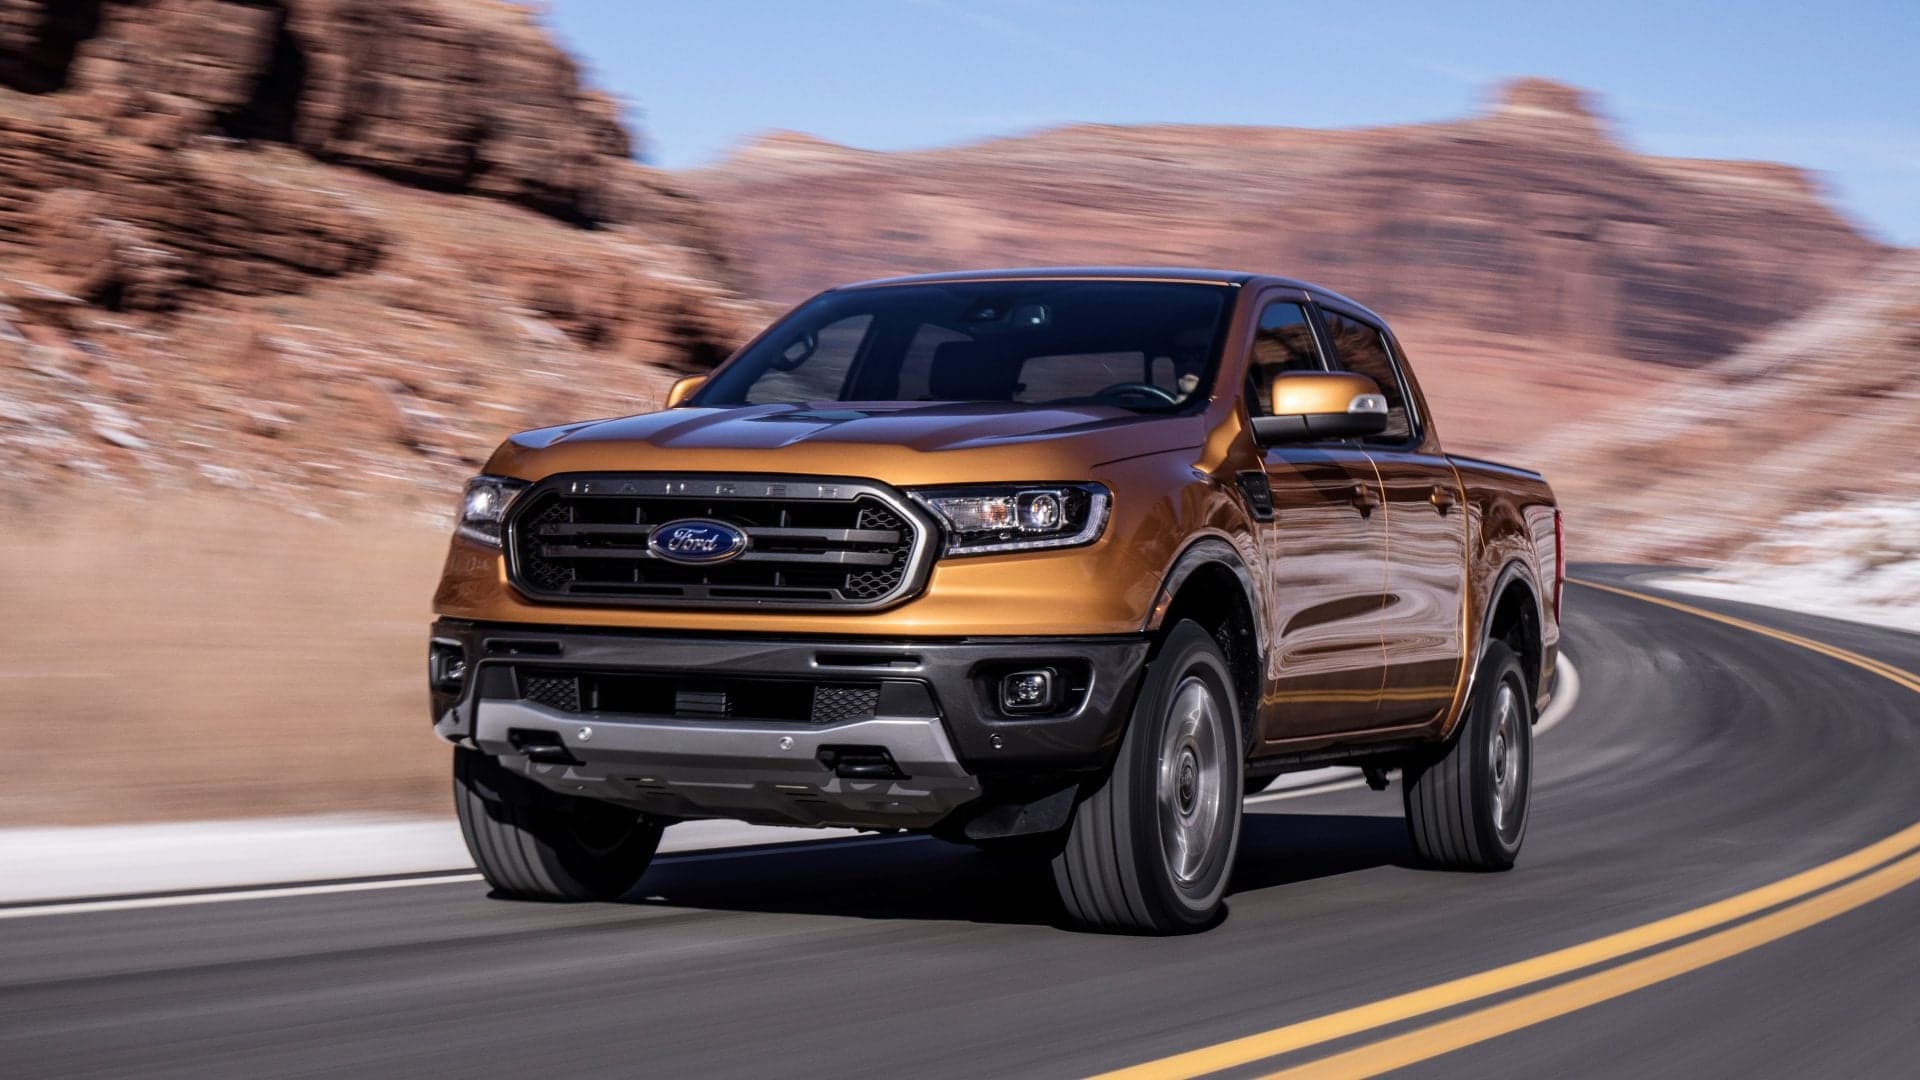 Go Go Power: You Can Now Configure Your Own 2019 Ford Ranger